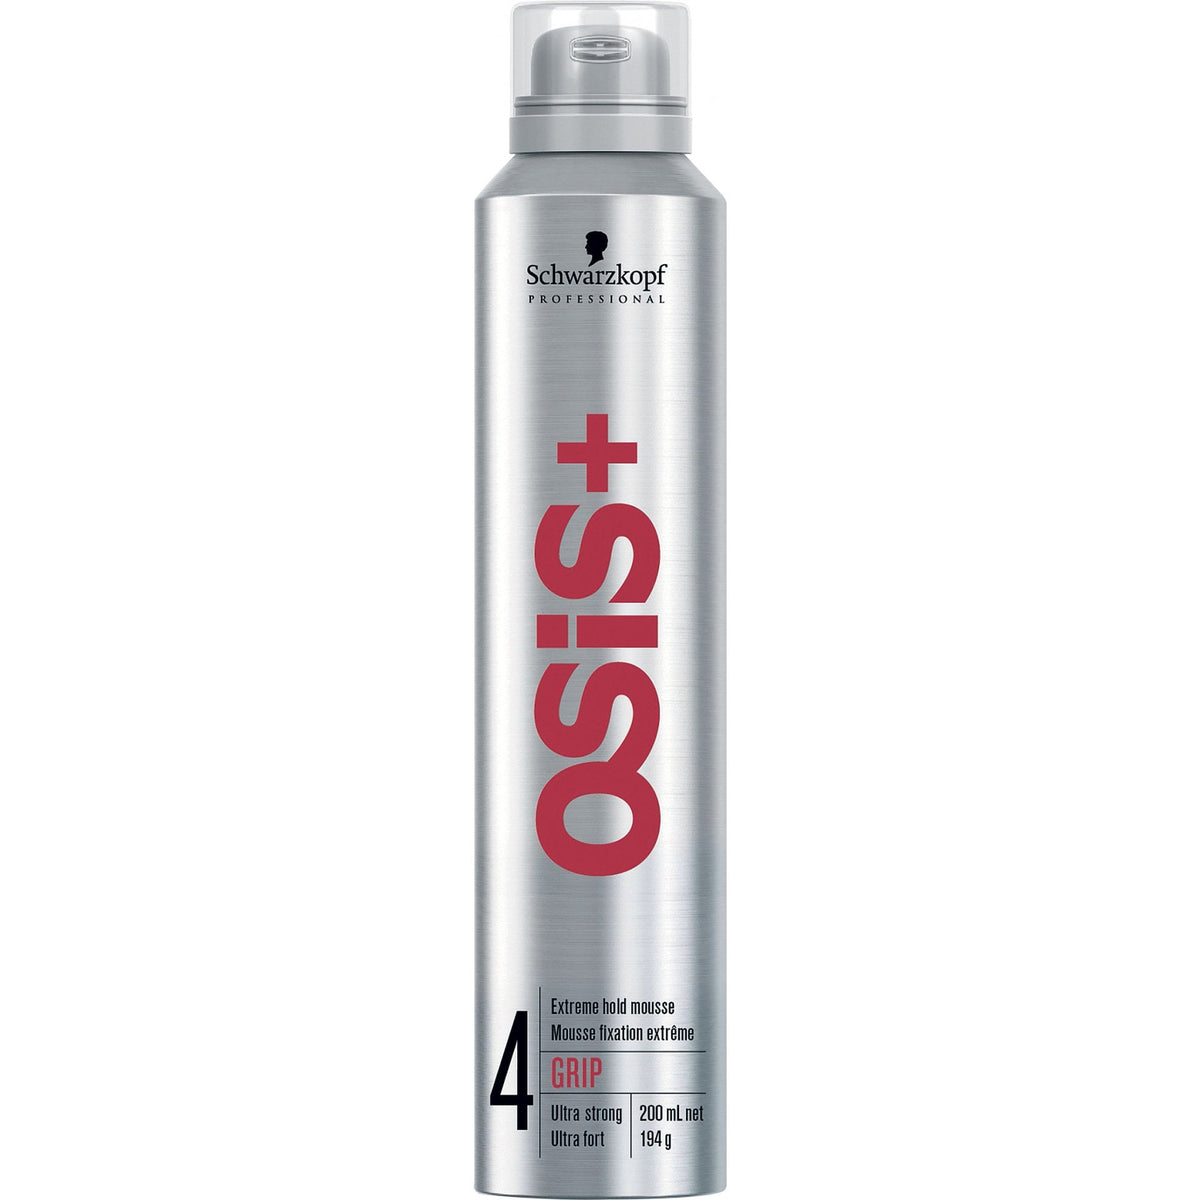 Osis+ Grip Extreme Hold Mousse